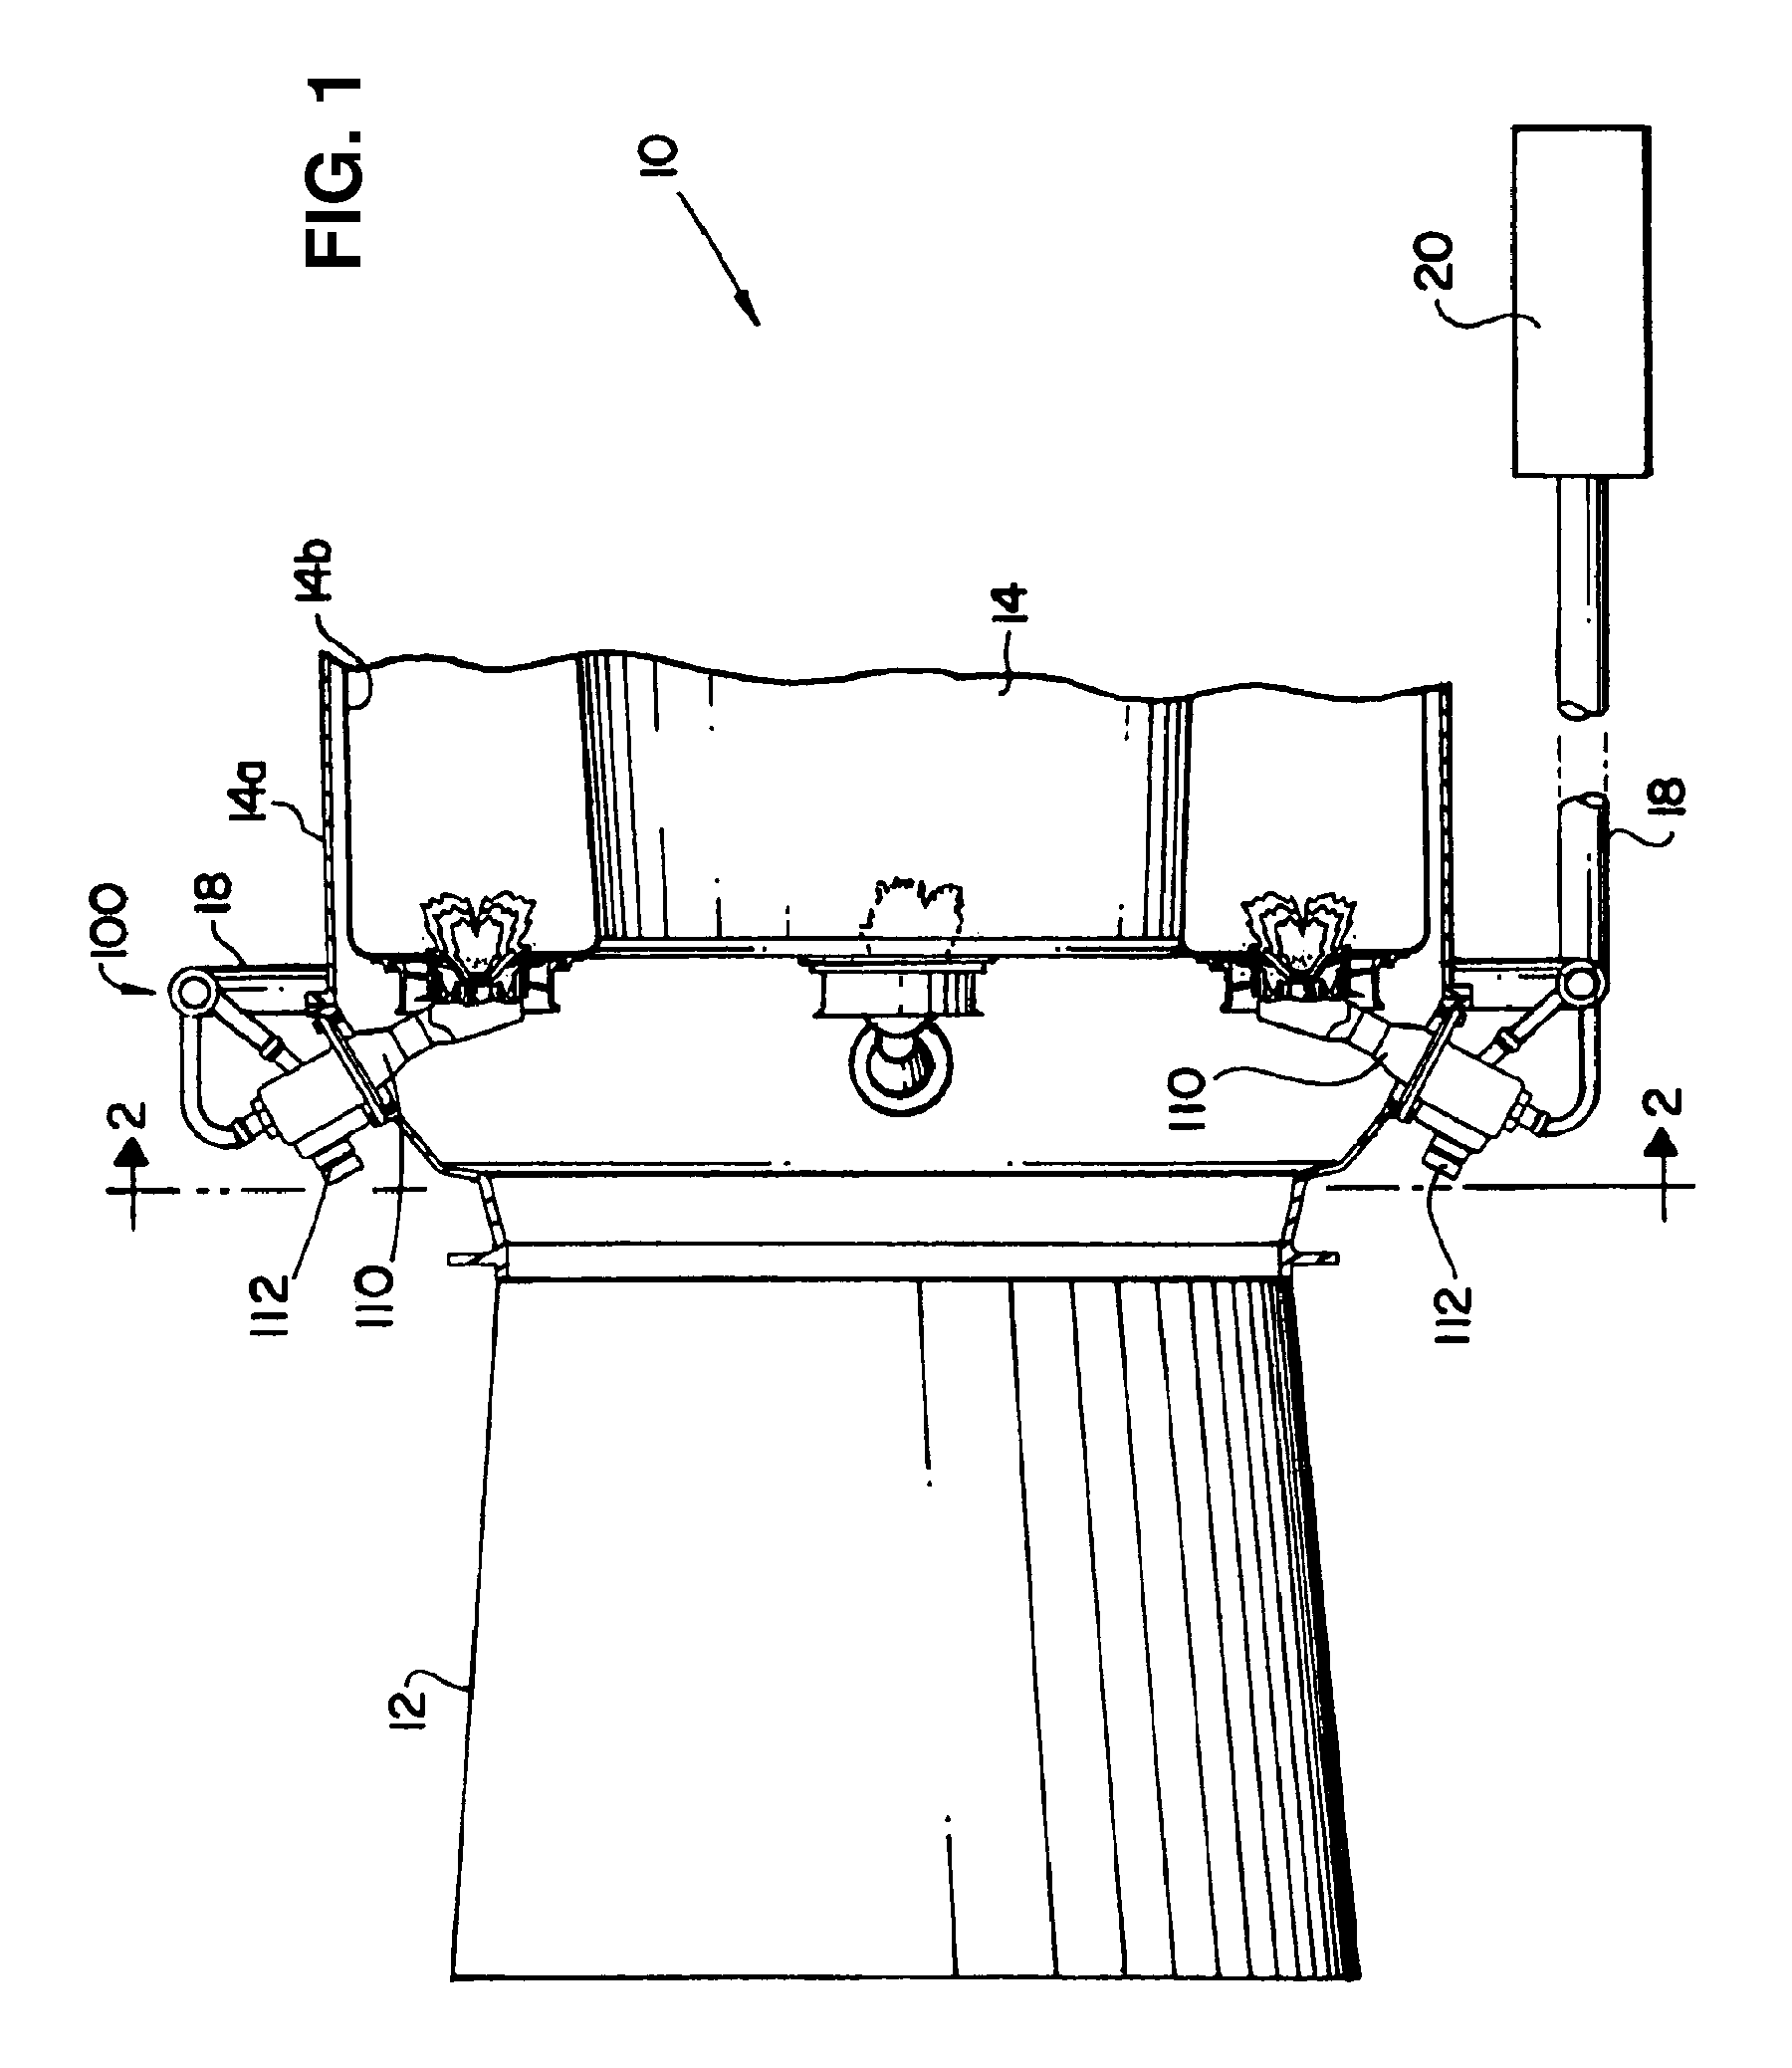 Variable amplitude double binary valve system for active fuel control